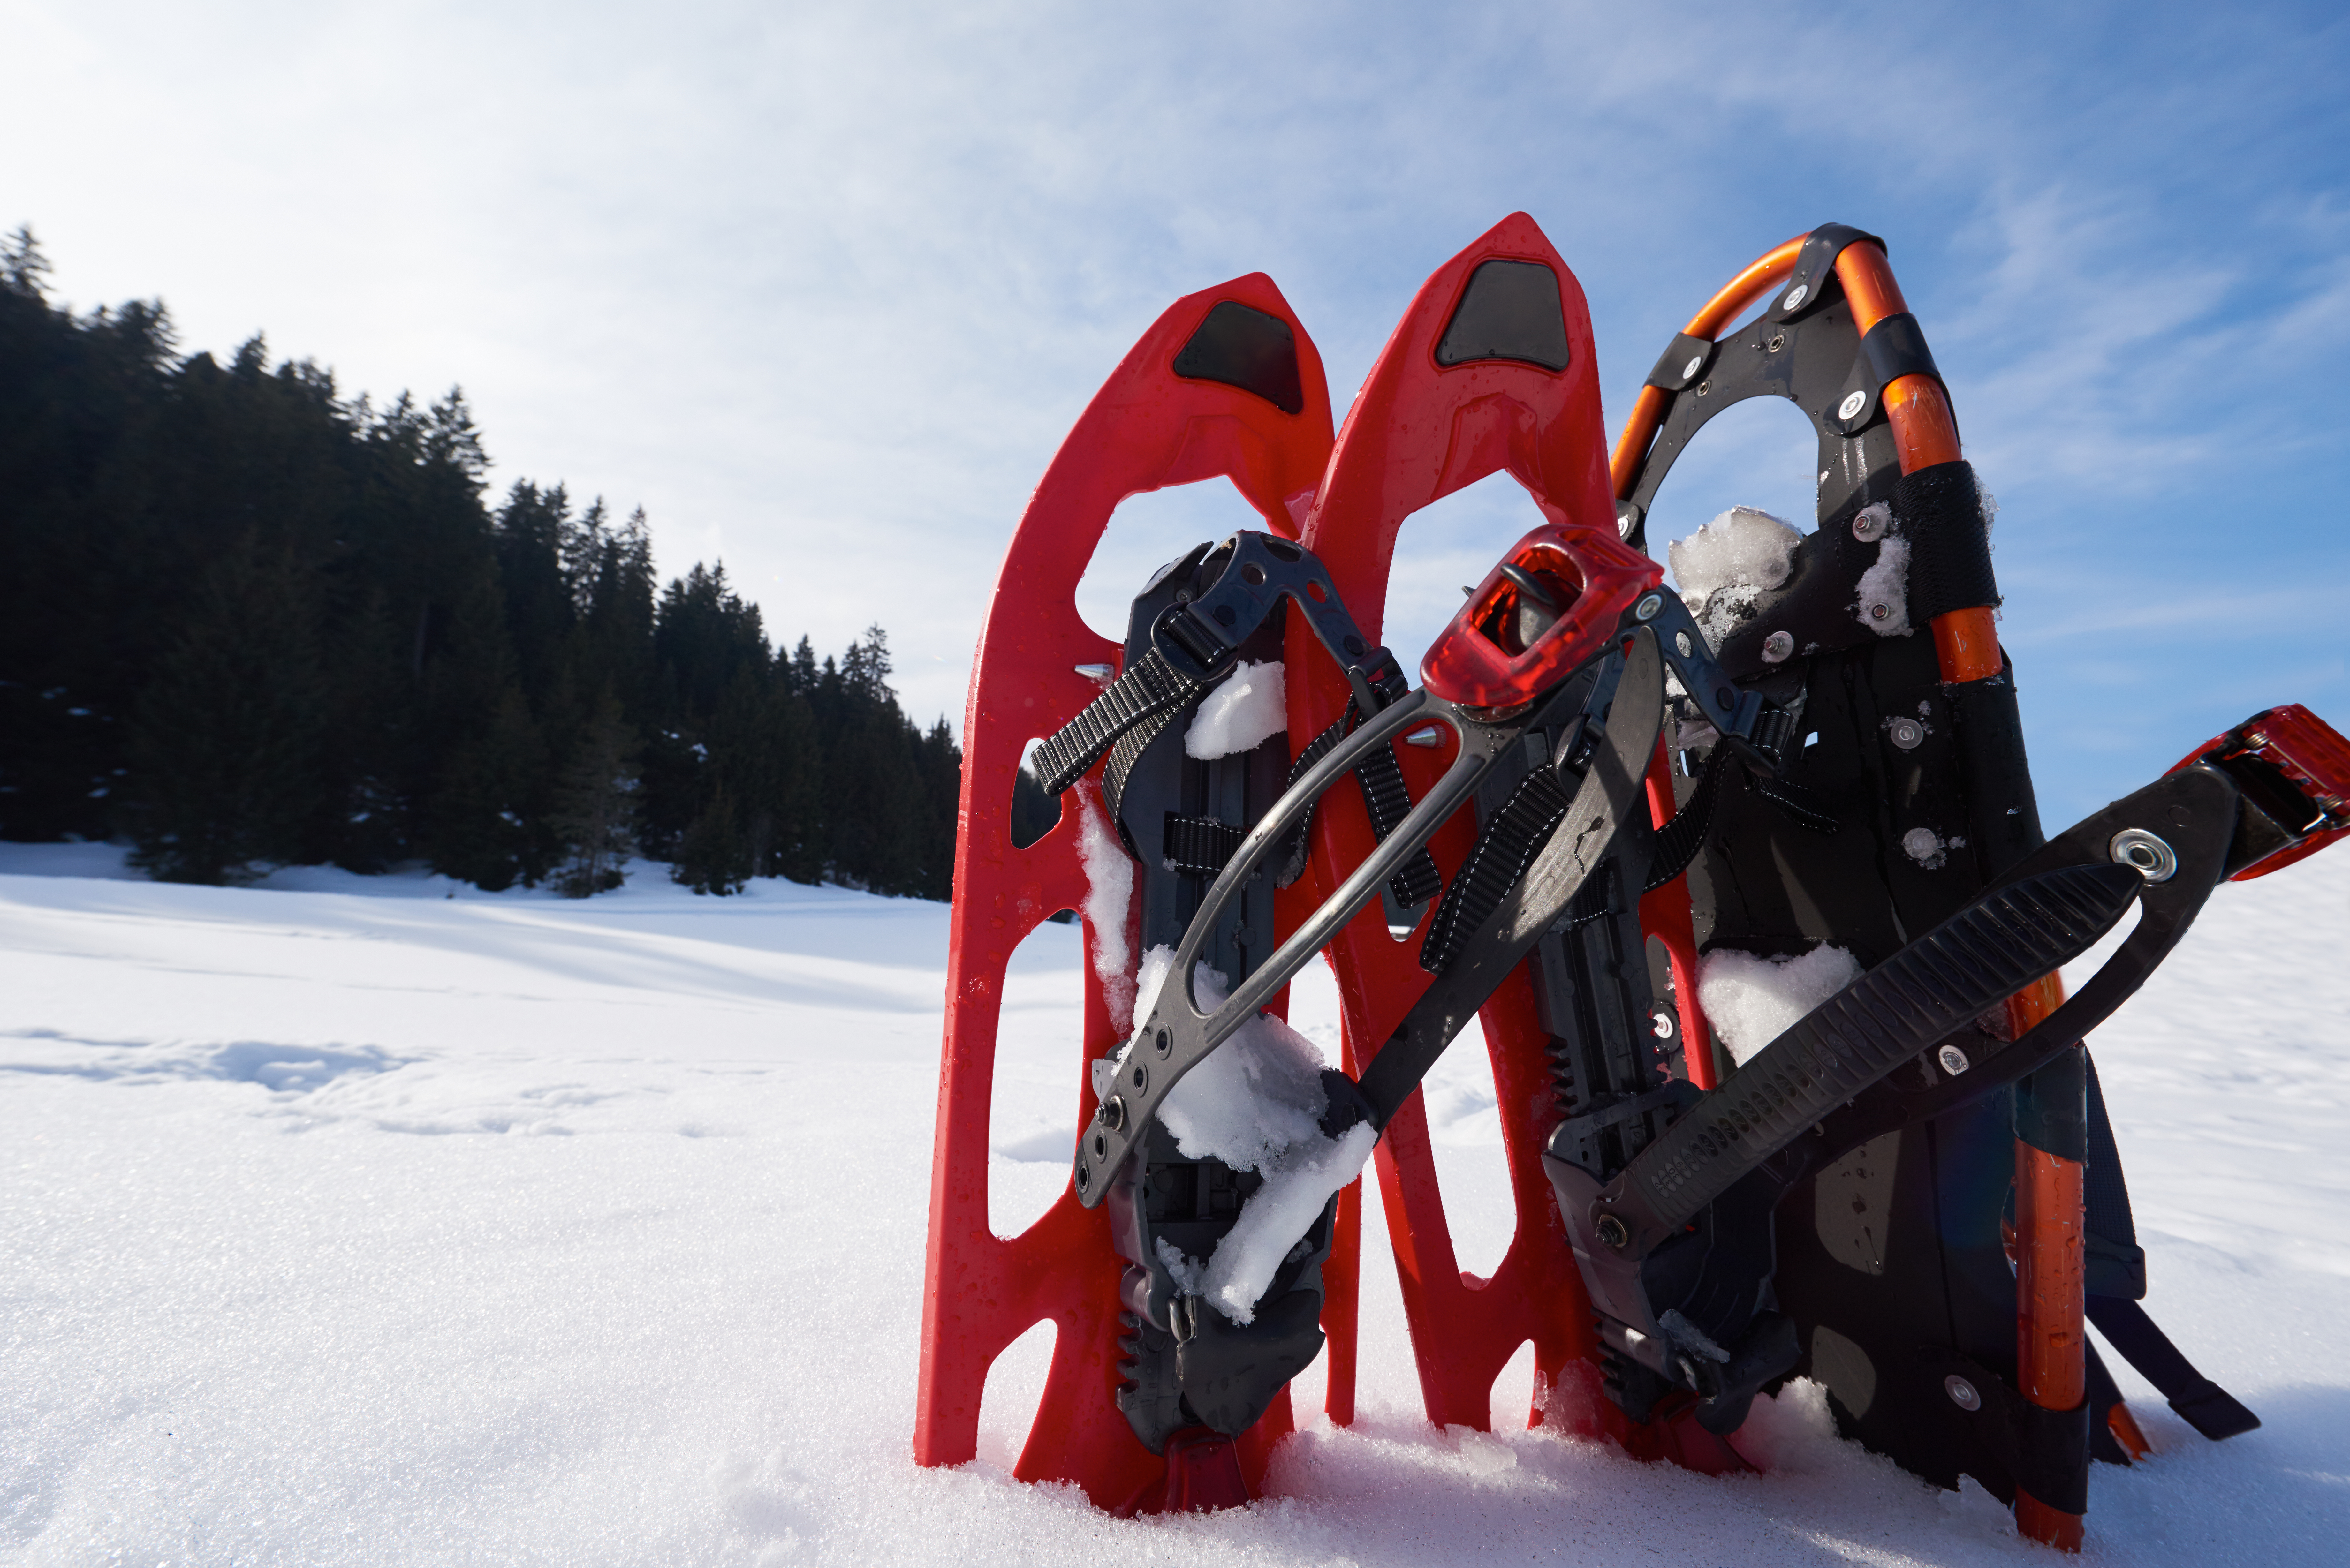 snowshoes used for walking on snow